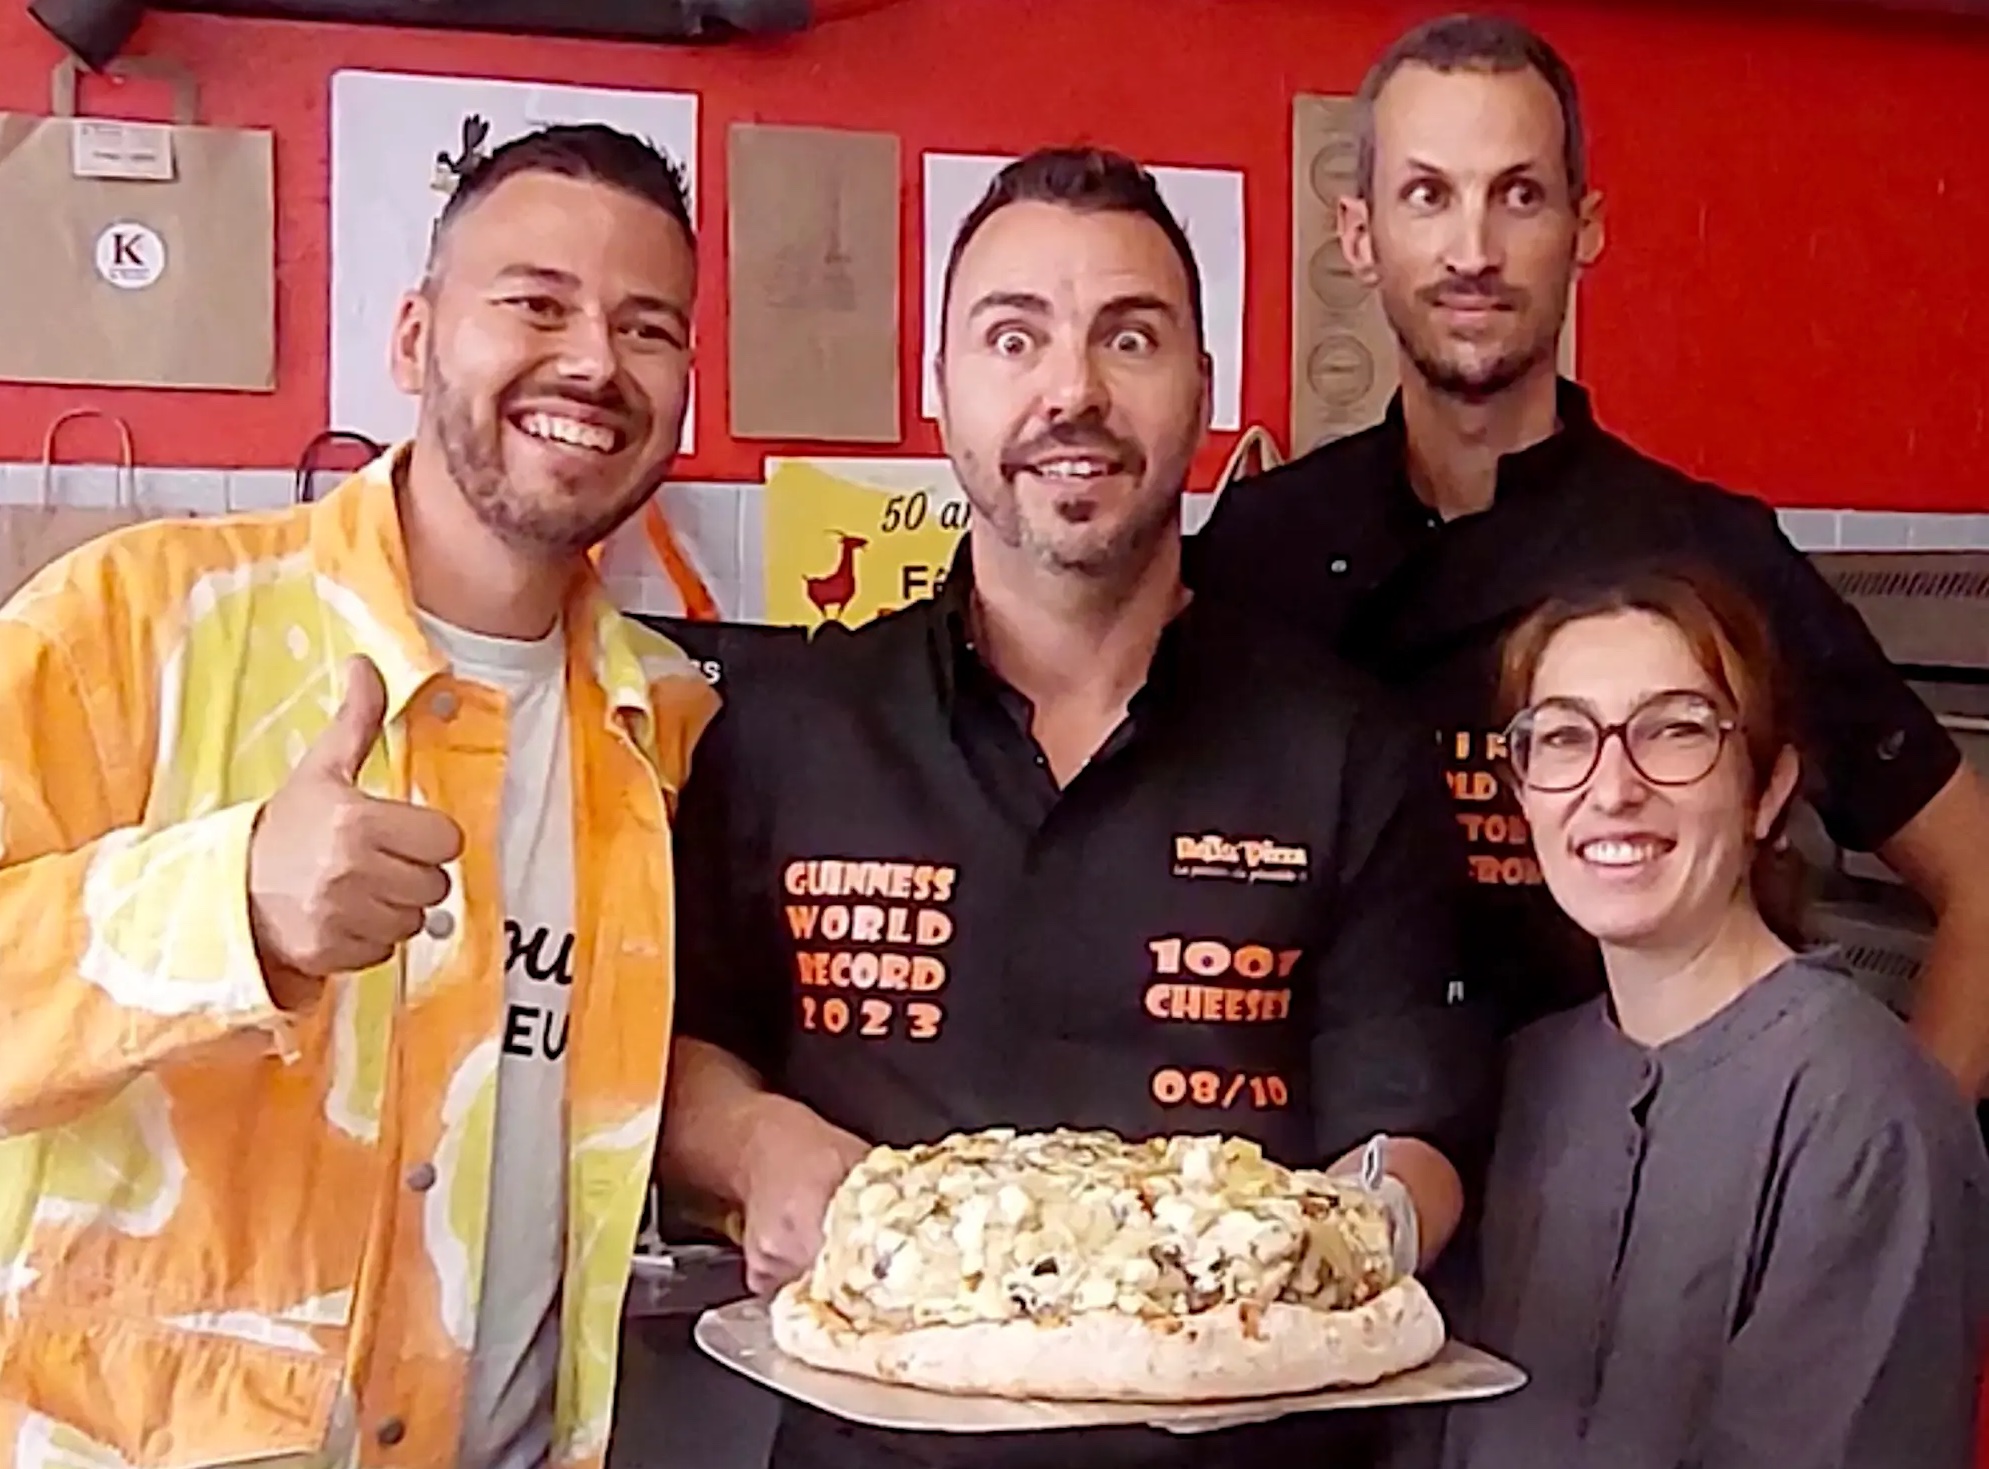 This photo shows three men and one woman displaying a pizza topped with 1,001 different cheeses.